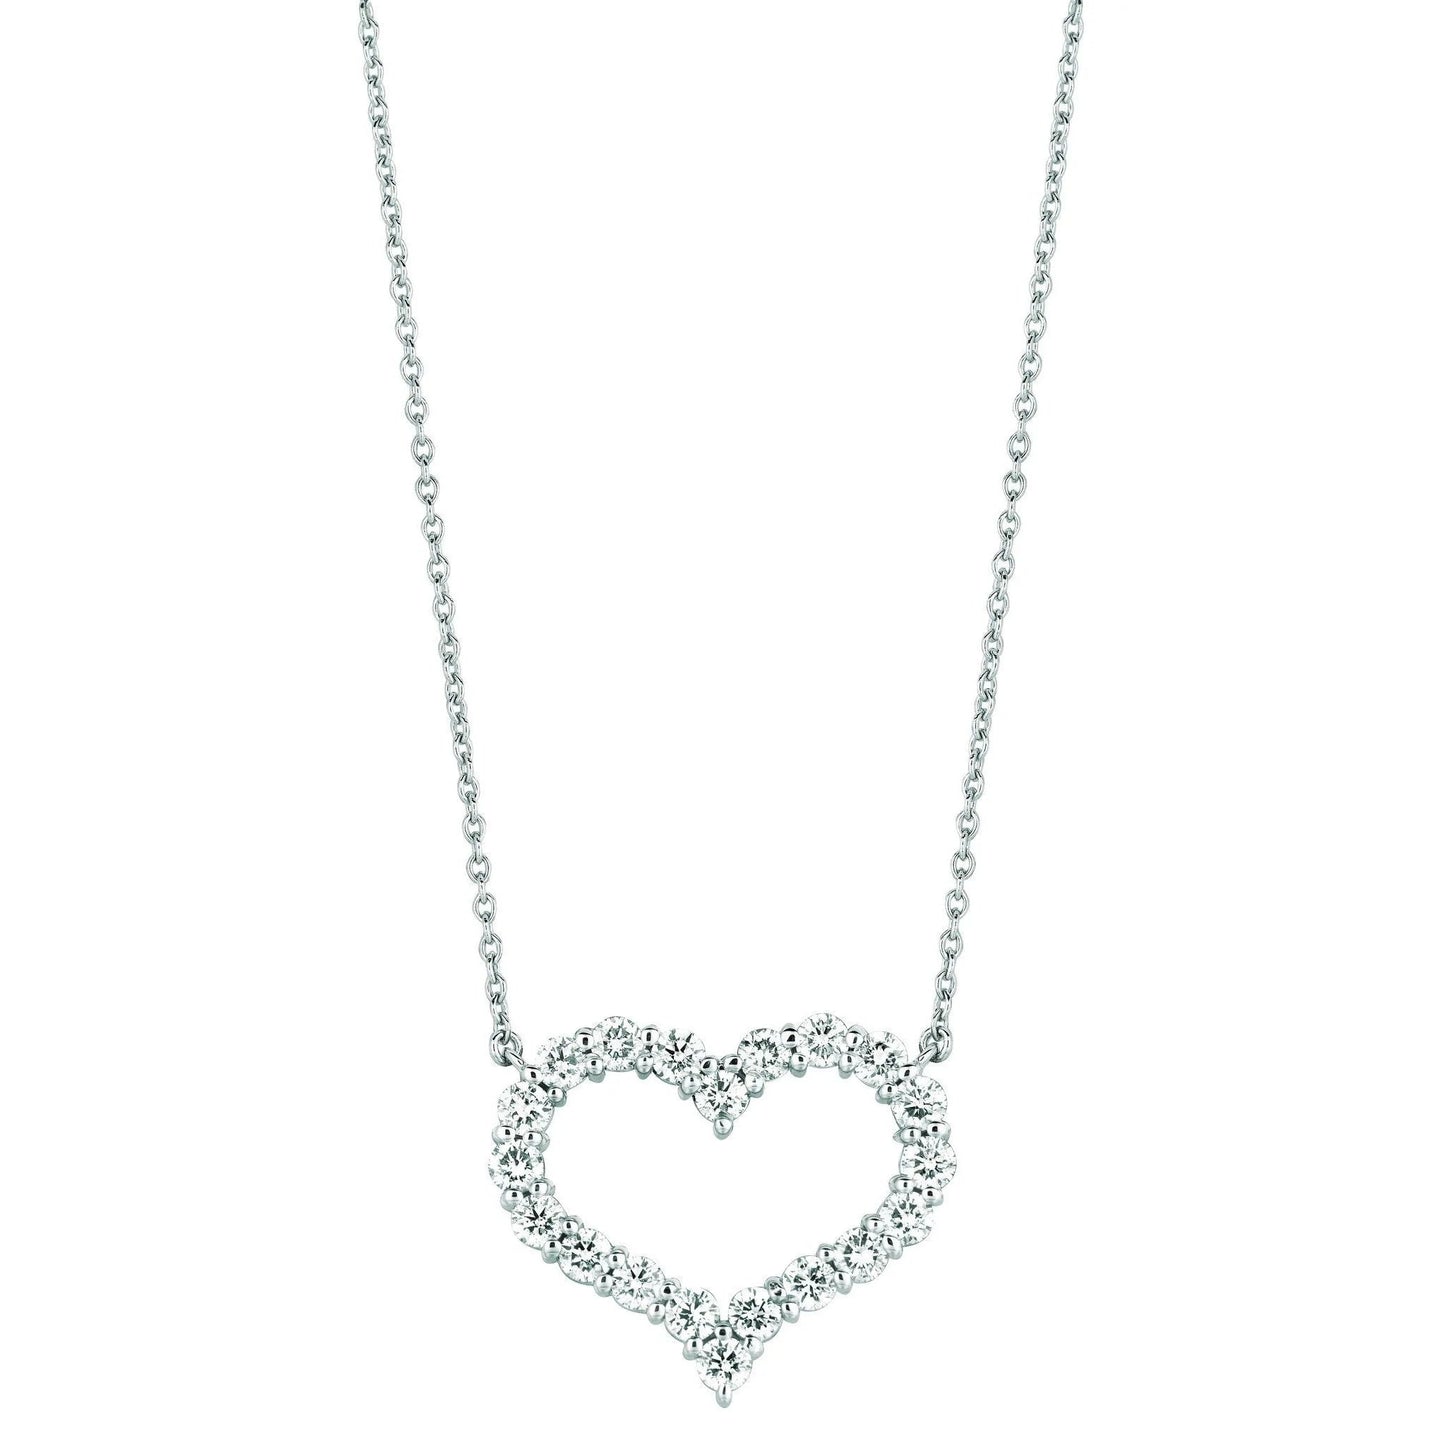 Real Diamond Heart Necklace Pendant 3.08 Carats 14K White Gold